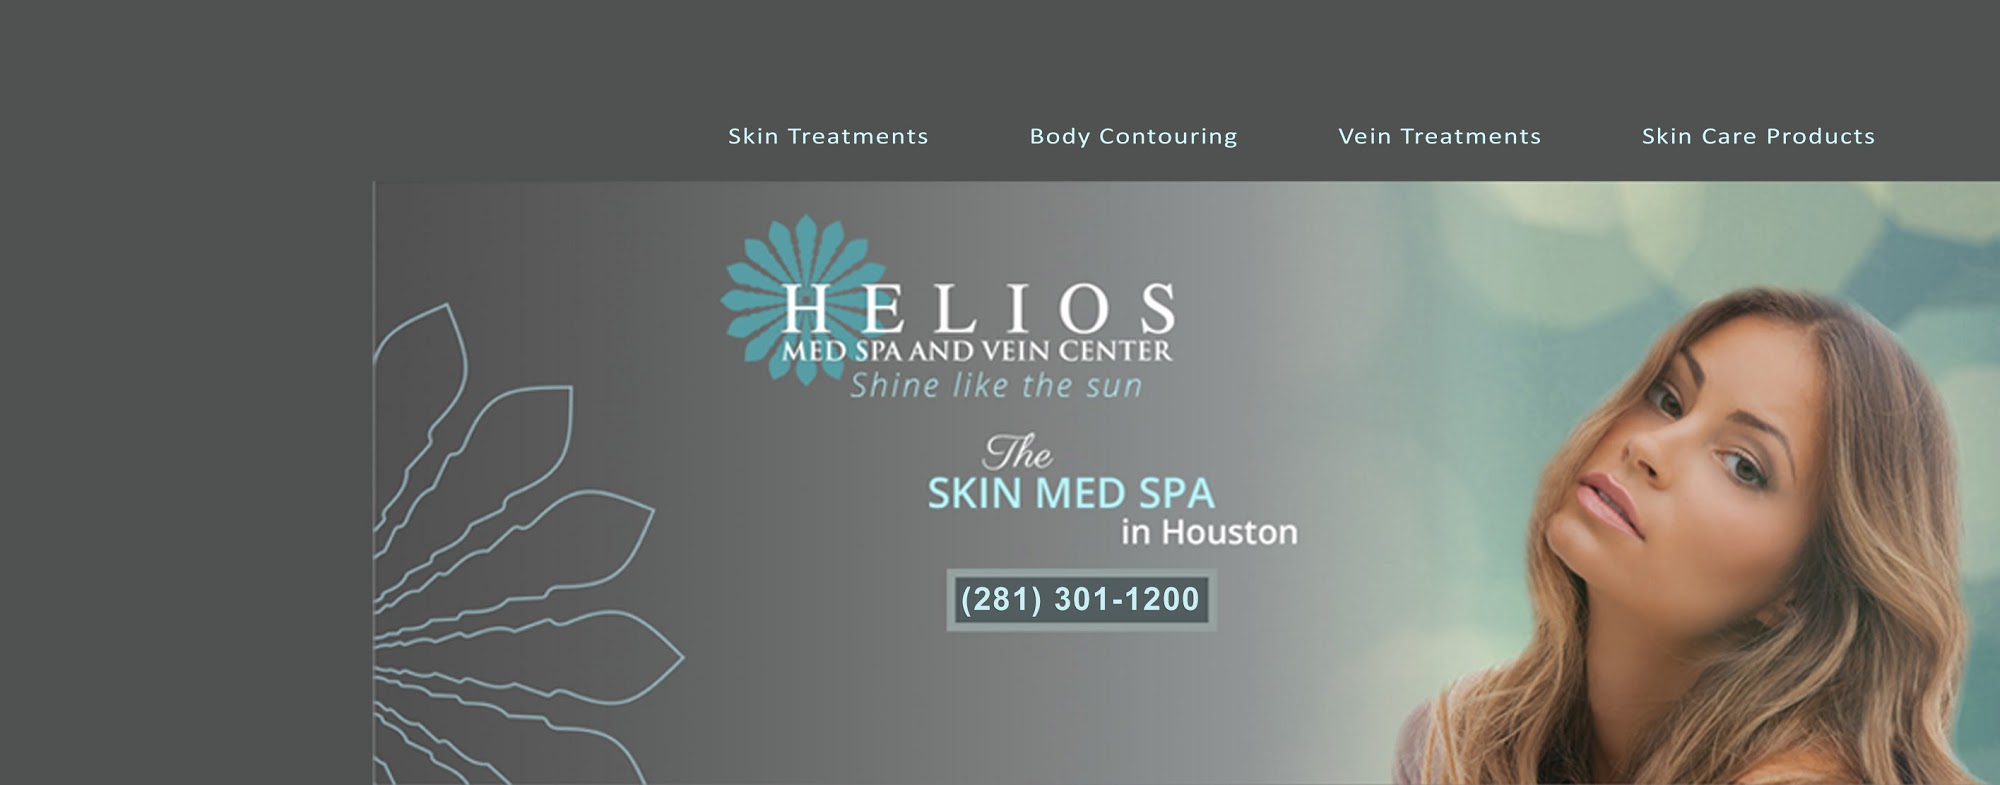 Helios Med Spa And Vein Center